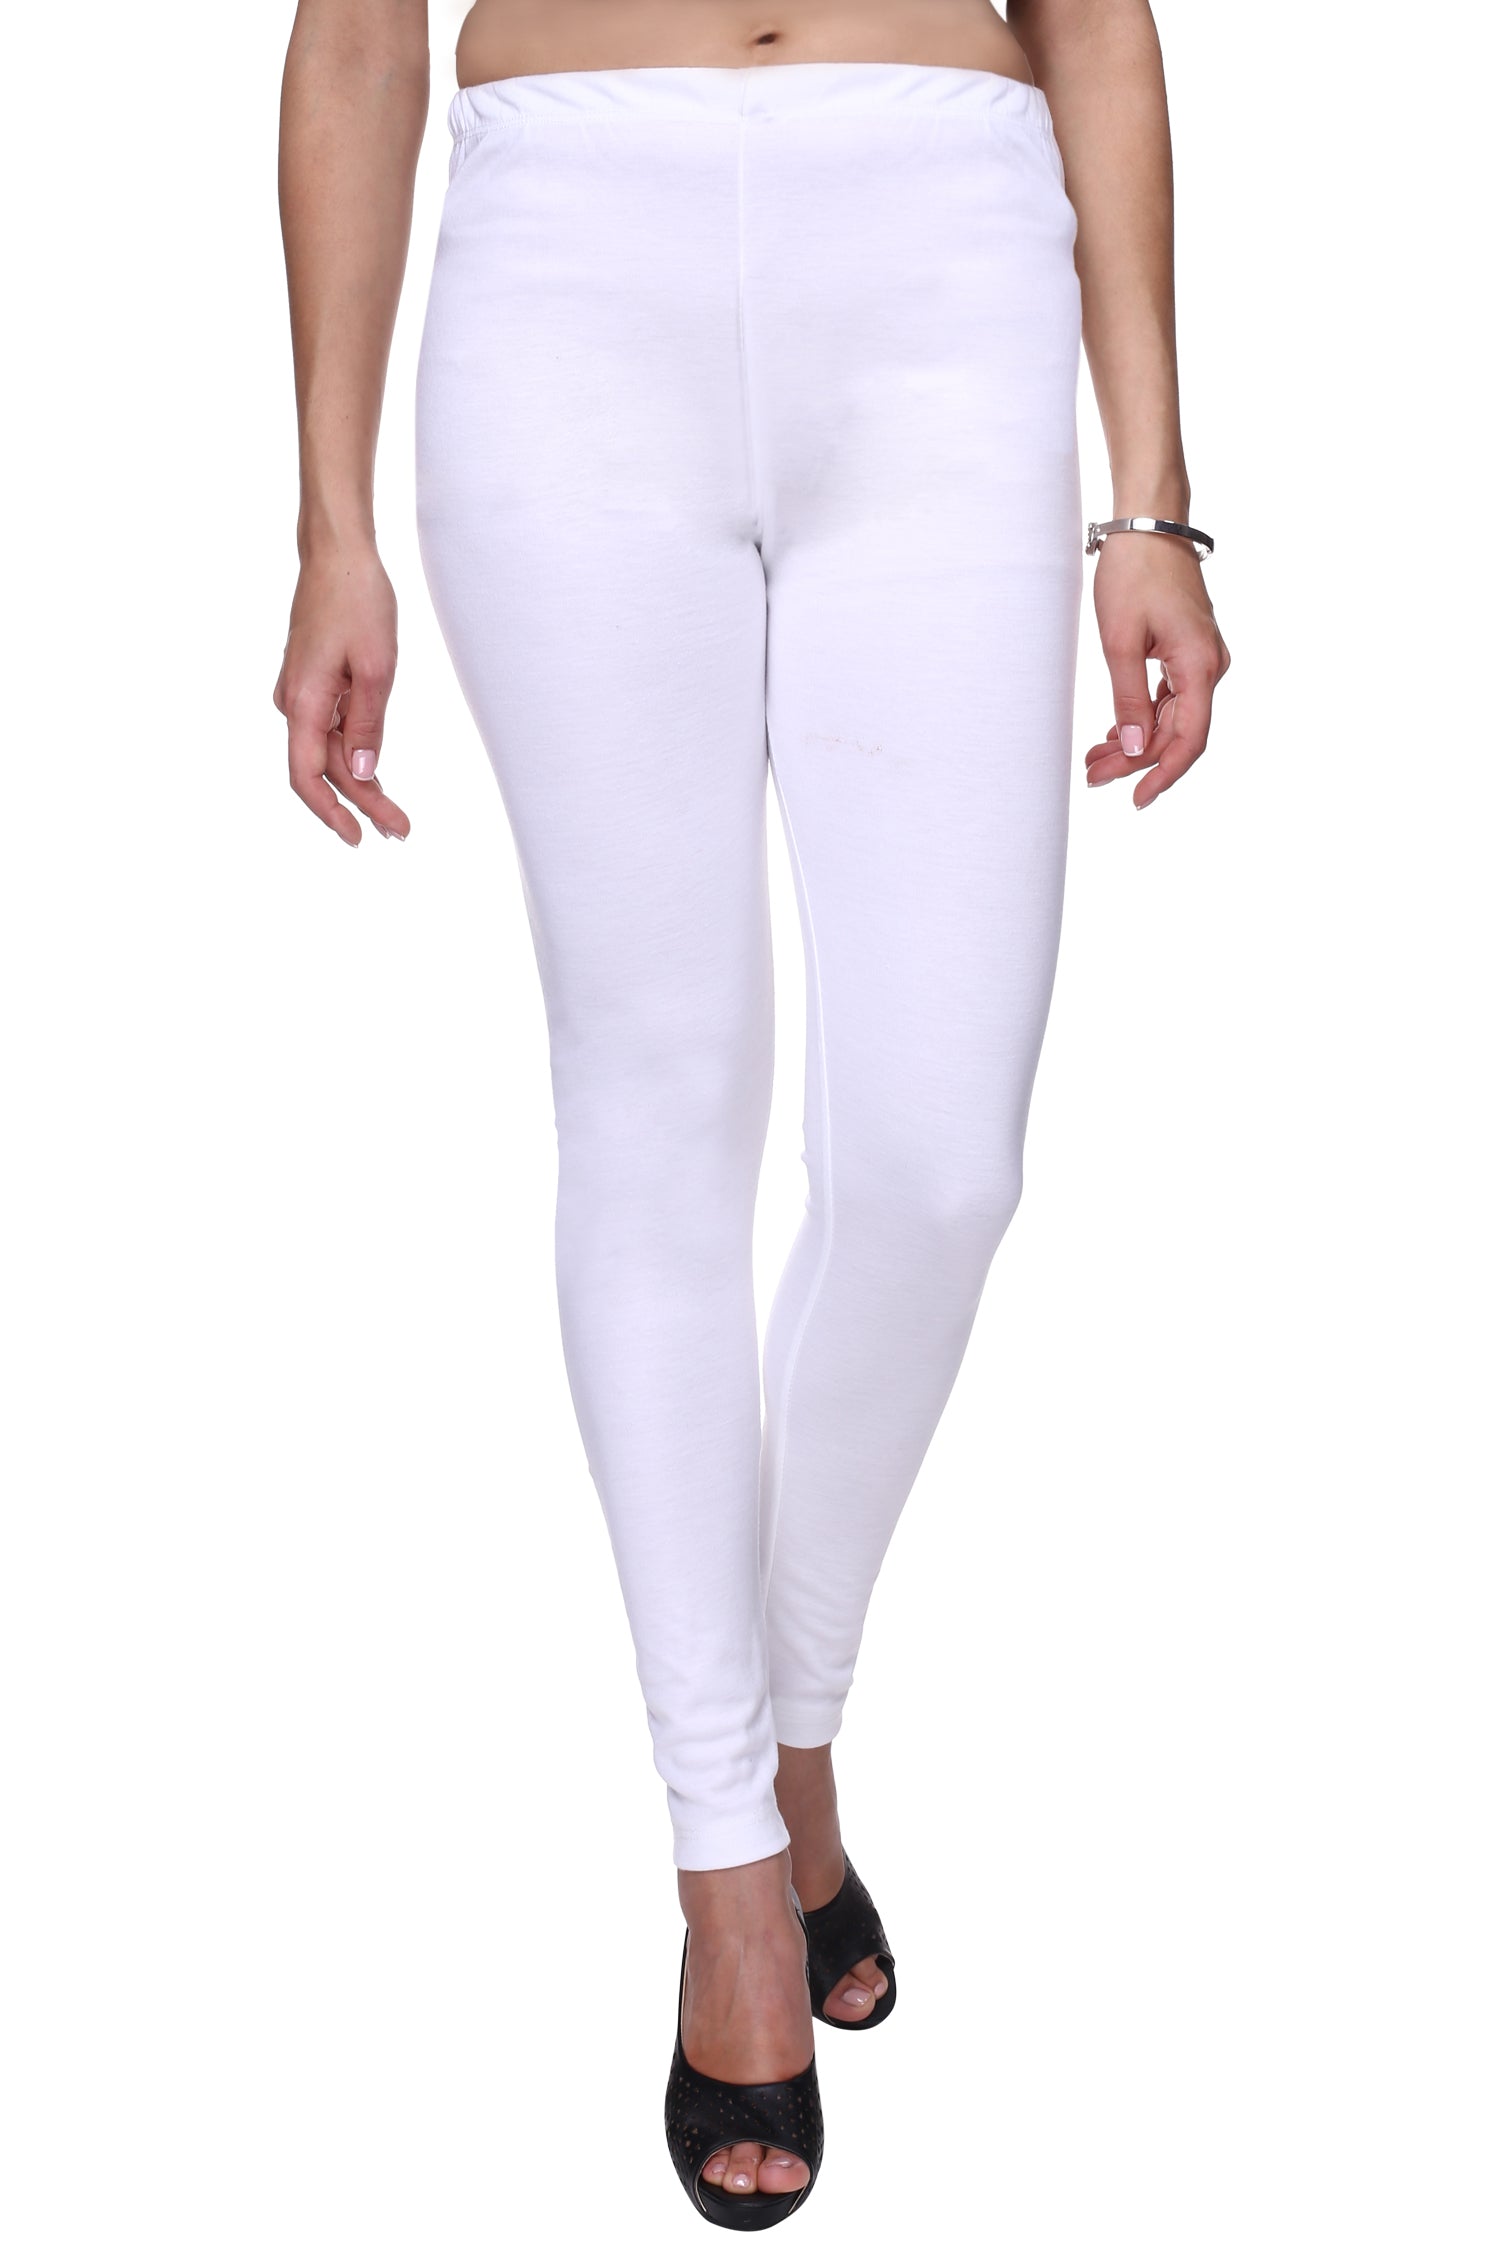 White Cotton Churidar Leggings, Cotton Lycra Blend, Mid Rise, Soft  Cotton, Casual to Formal, Best Pair with Any Women Upper Wear